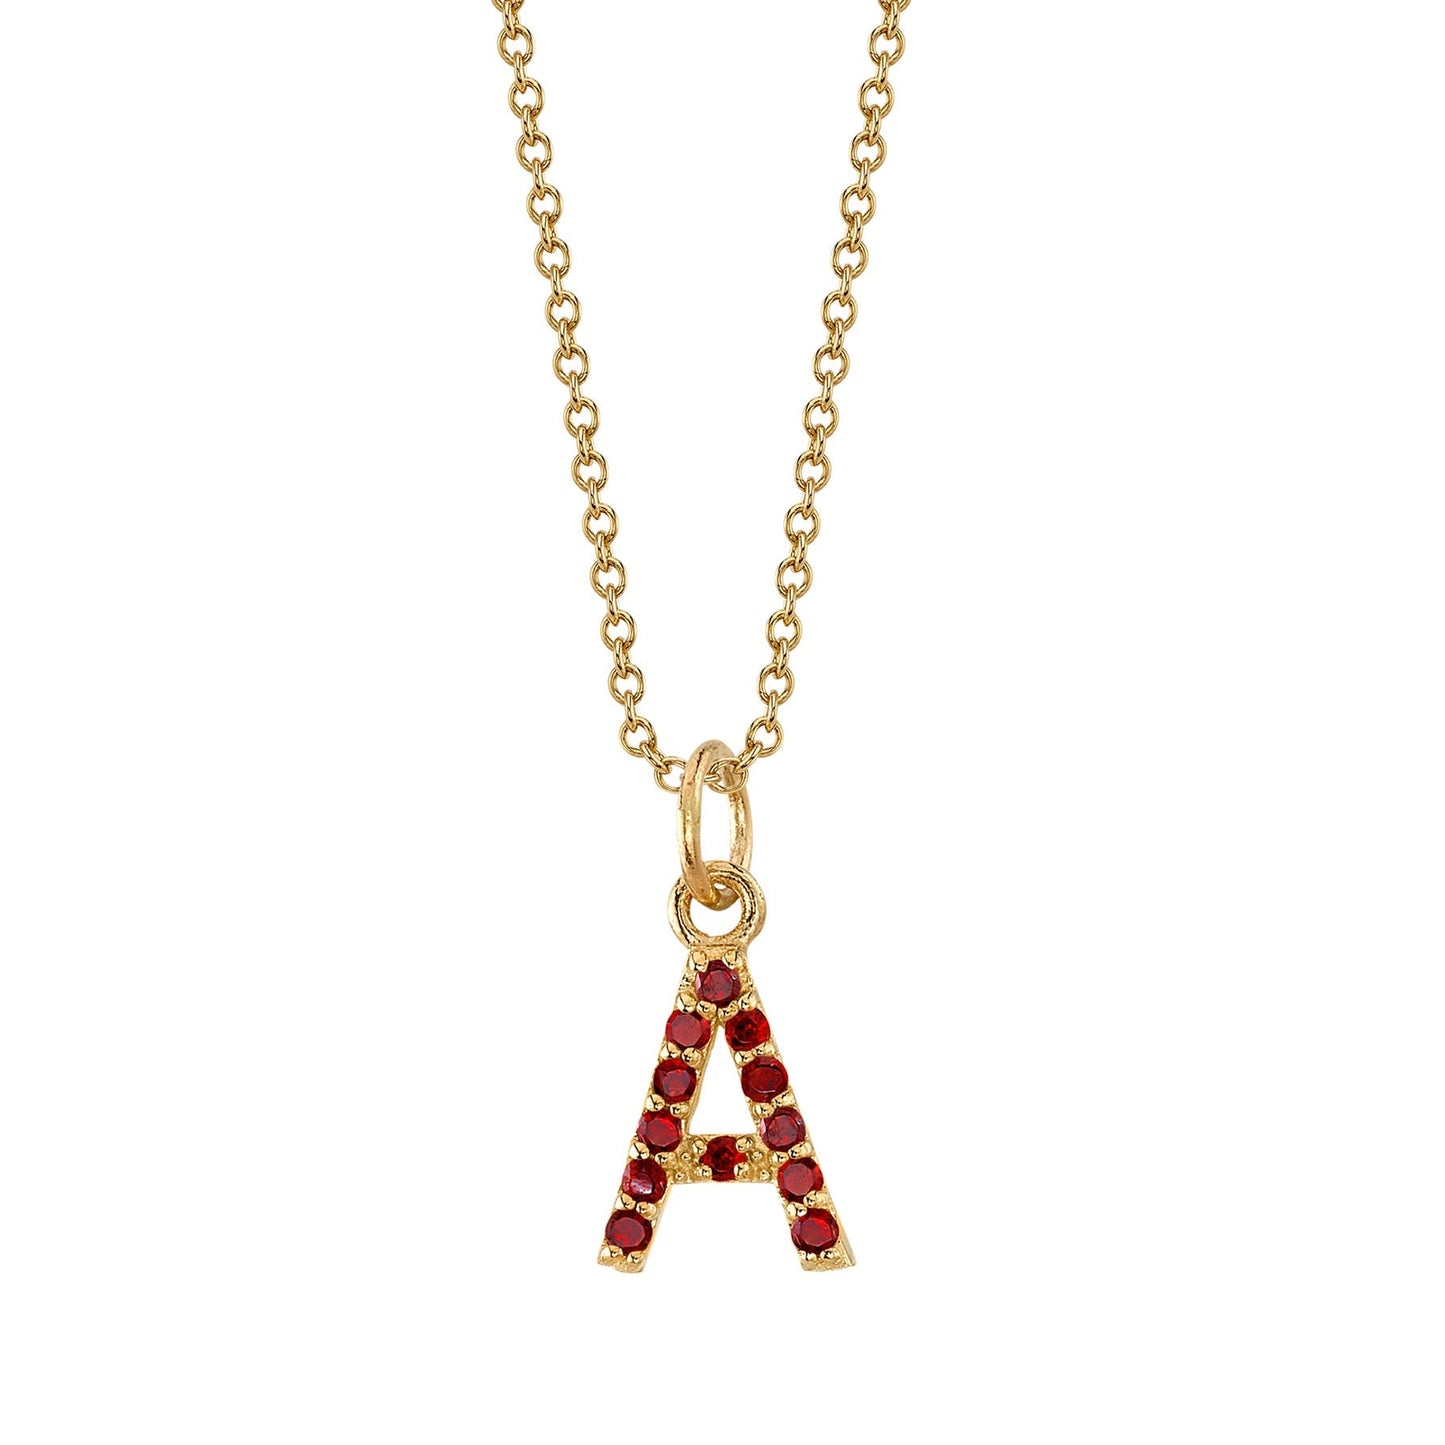 A Initial Birthstone Charm Necklace